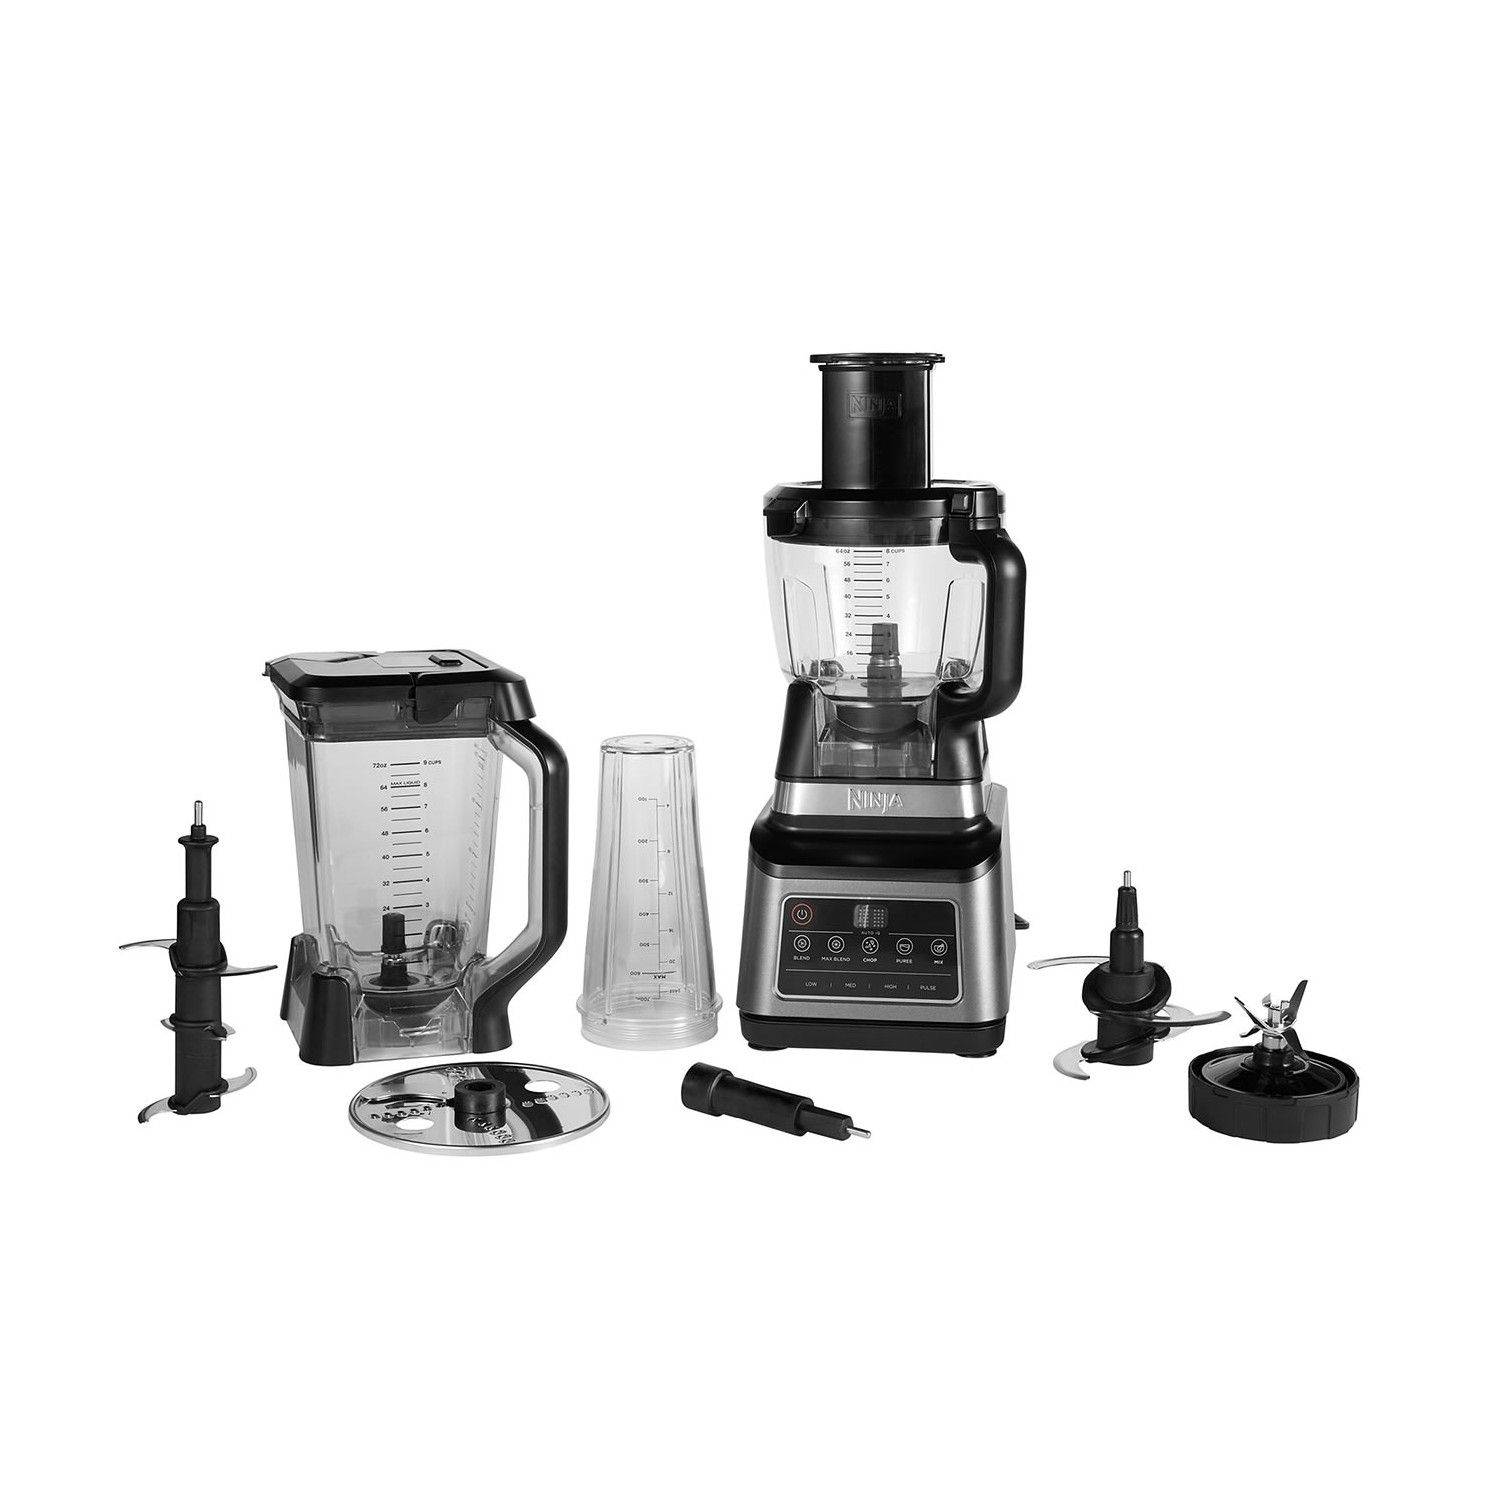 Ninja BN800UK 3-in-1 Blender and Food Processor with Auto IQ - Black/Silver - 5